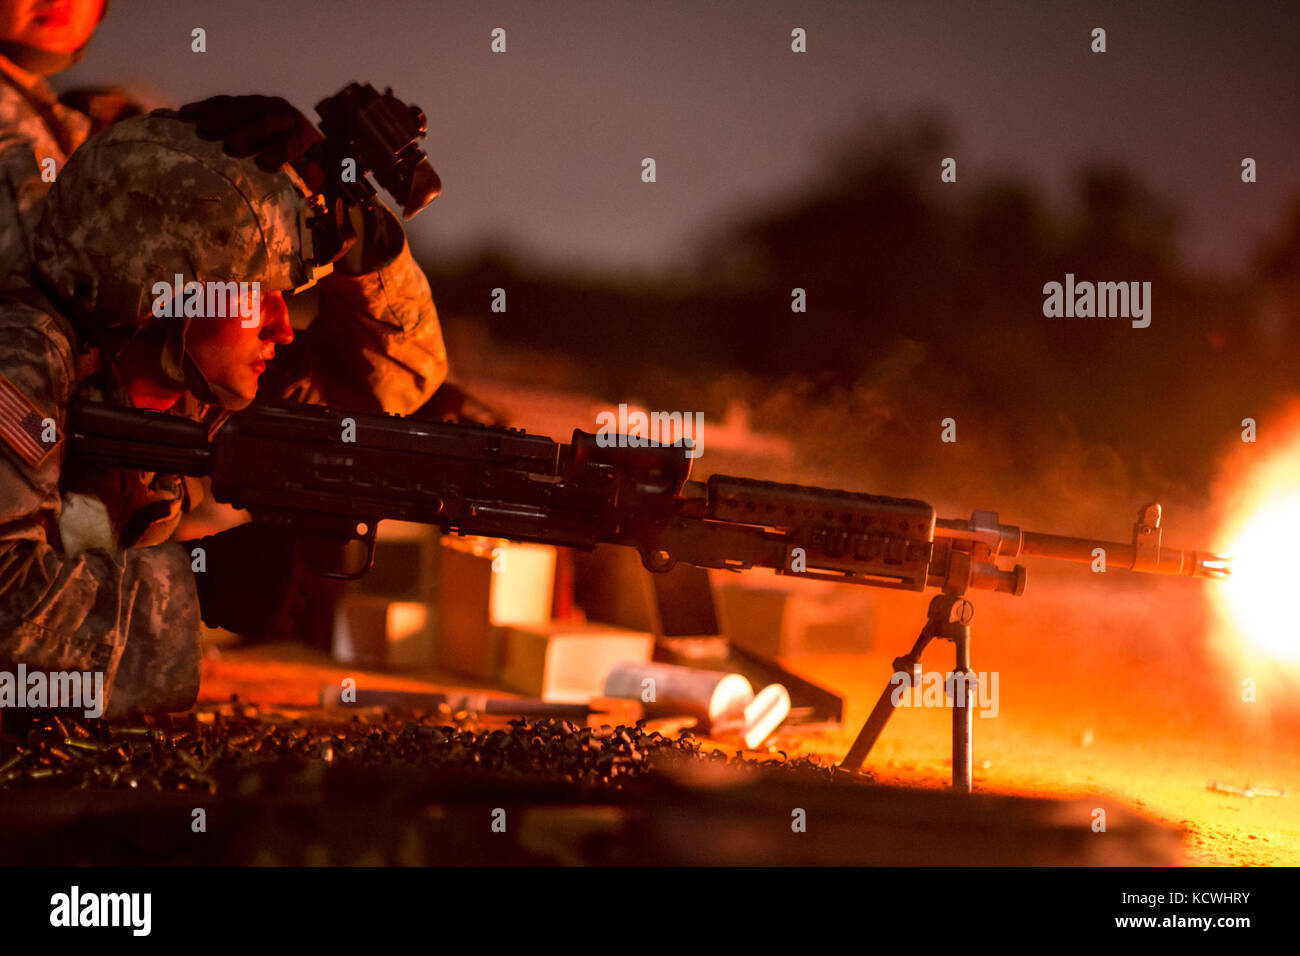 U.S. Army Spc. Edward Carr, combat engineer assigned to the 218th Maneuver Enhancement Brigade, S.C. Army National Guard fires a M240B machine gun during the crew-served weapons familiarization night training at Fort Jackson, S.C., Sept. 15, 2016.  Carr is assisting in the training of 30 Soldiers from multiple transportation and signal companies on dismounted security drills and crew-served weapons in preparation for their qualification next summer and to stay current with convoy security. (U.S. Air National Guard photo by Tech. Sgt. Jorge Intriago) Stock Photo